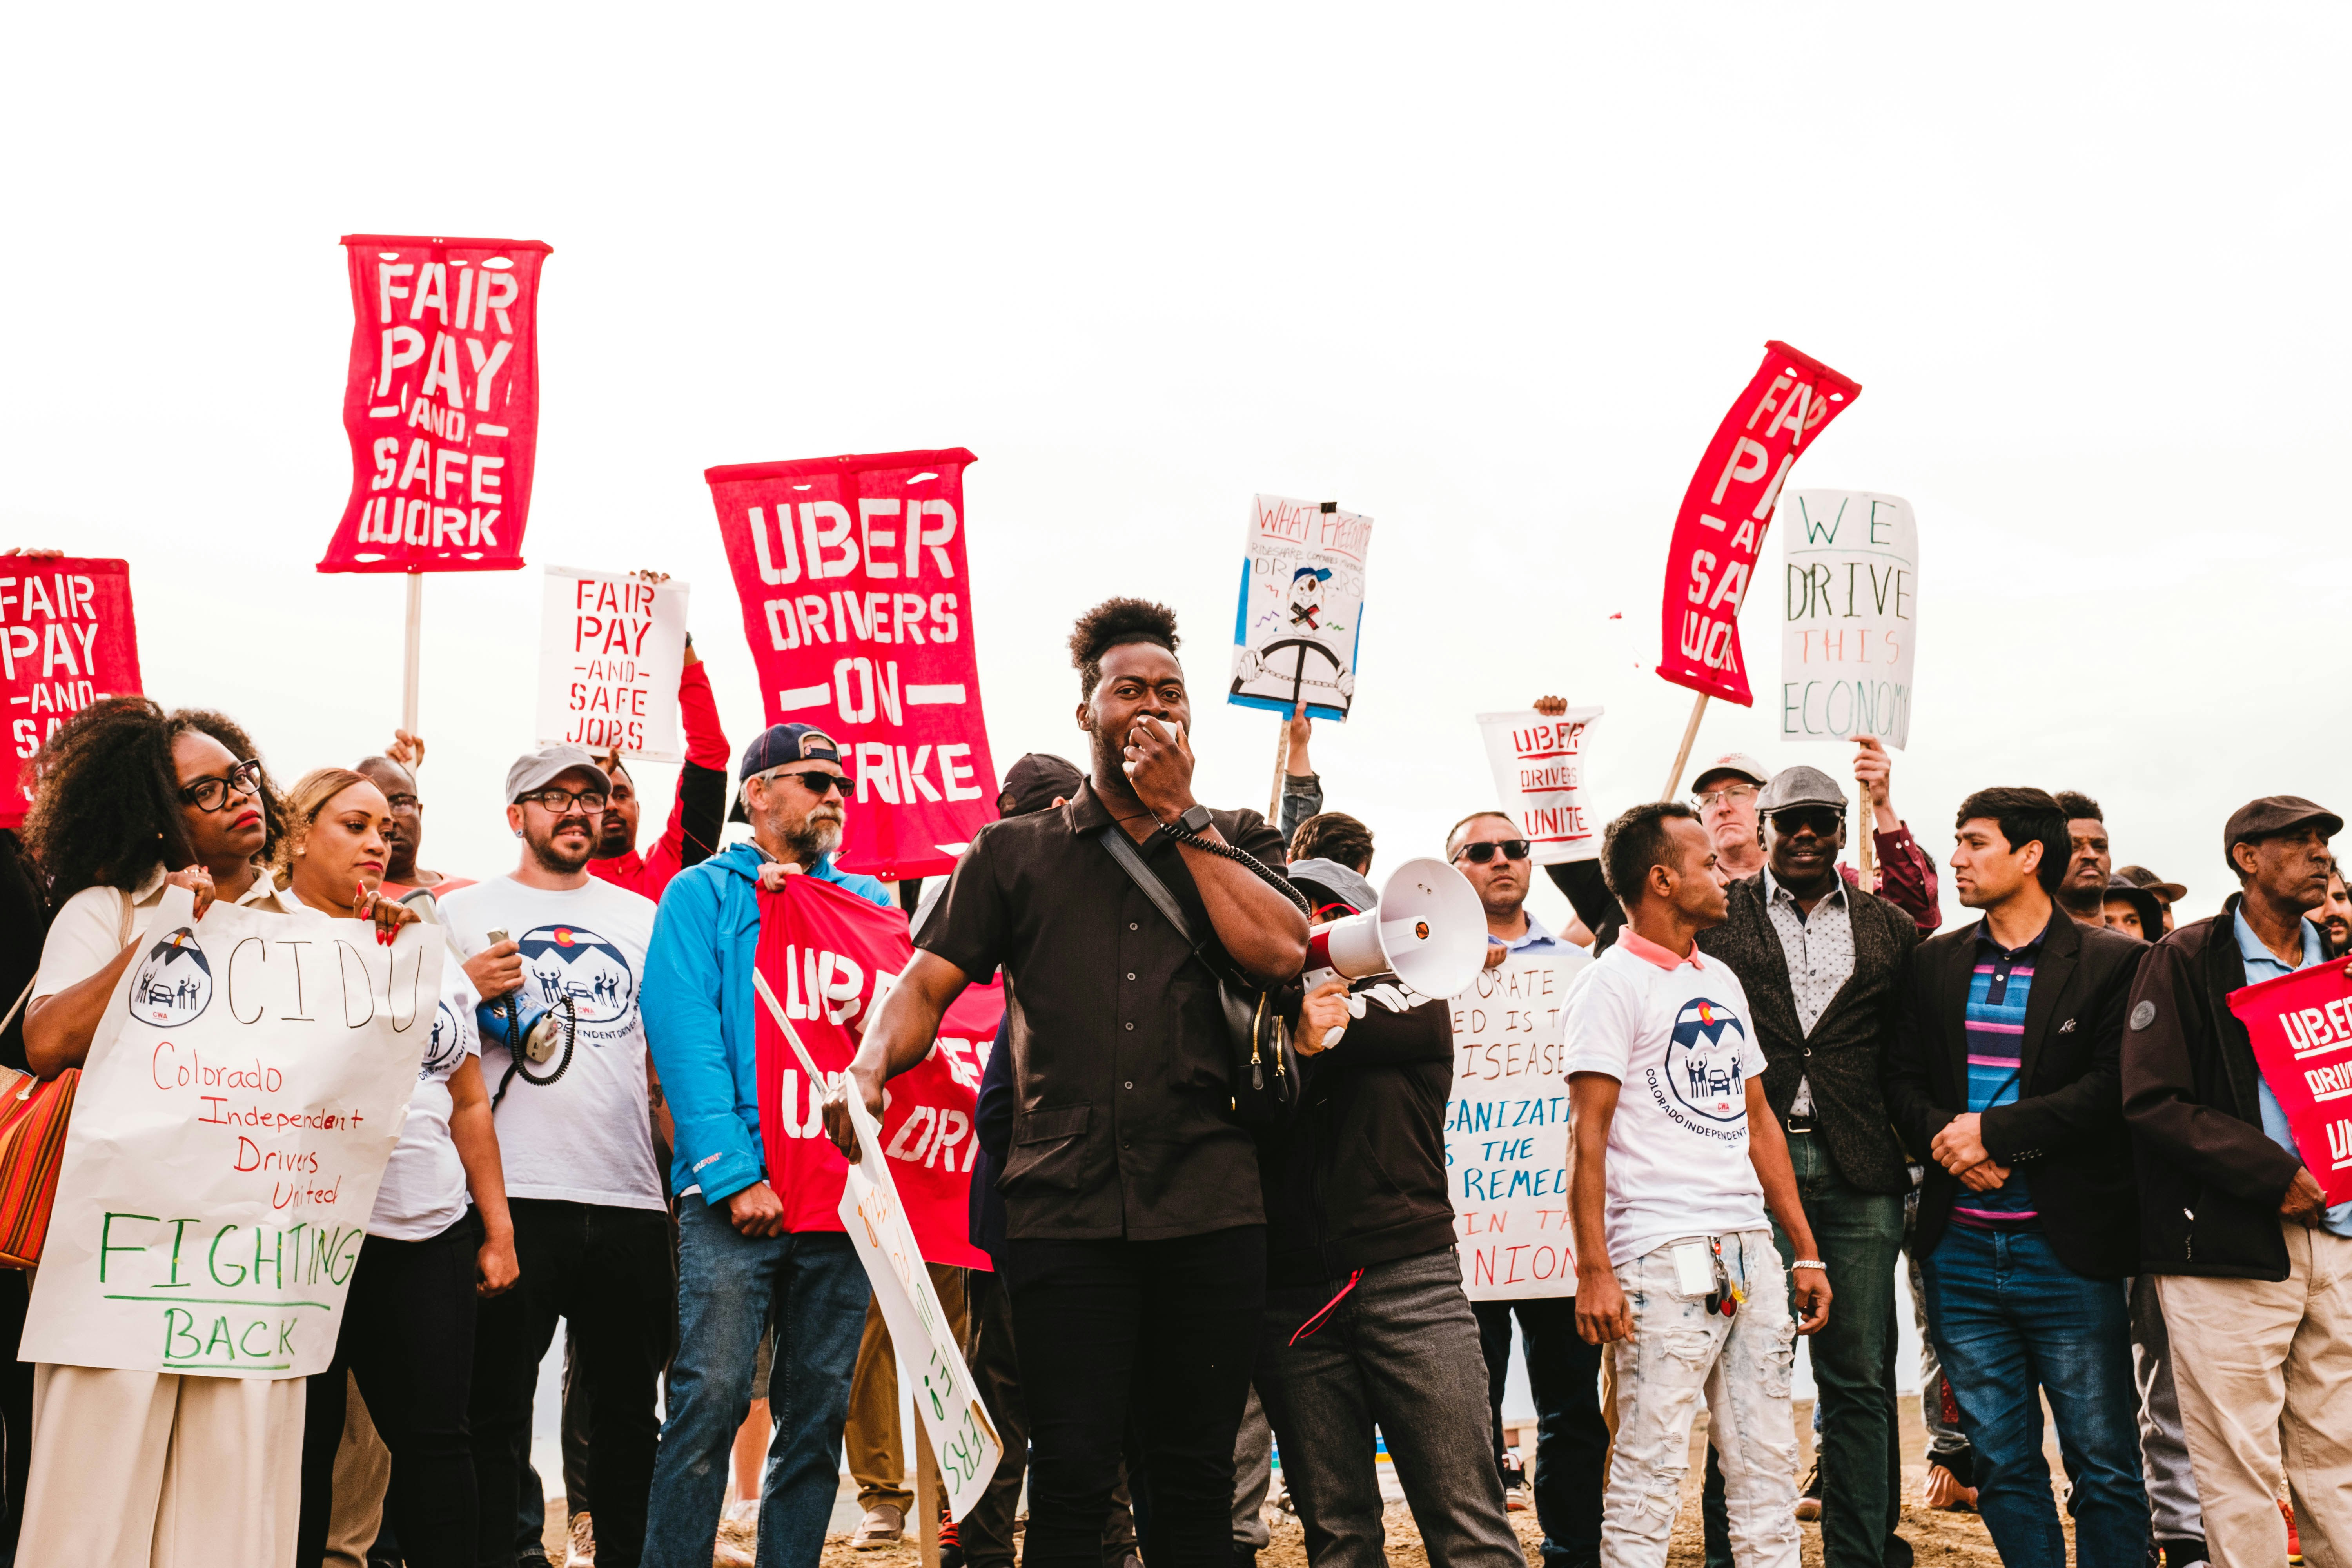 Uber drivers and allies with Colorado Independent Drivers United rallying at Denver International Airport on 5/4/23